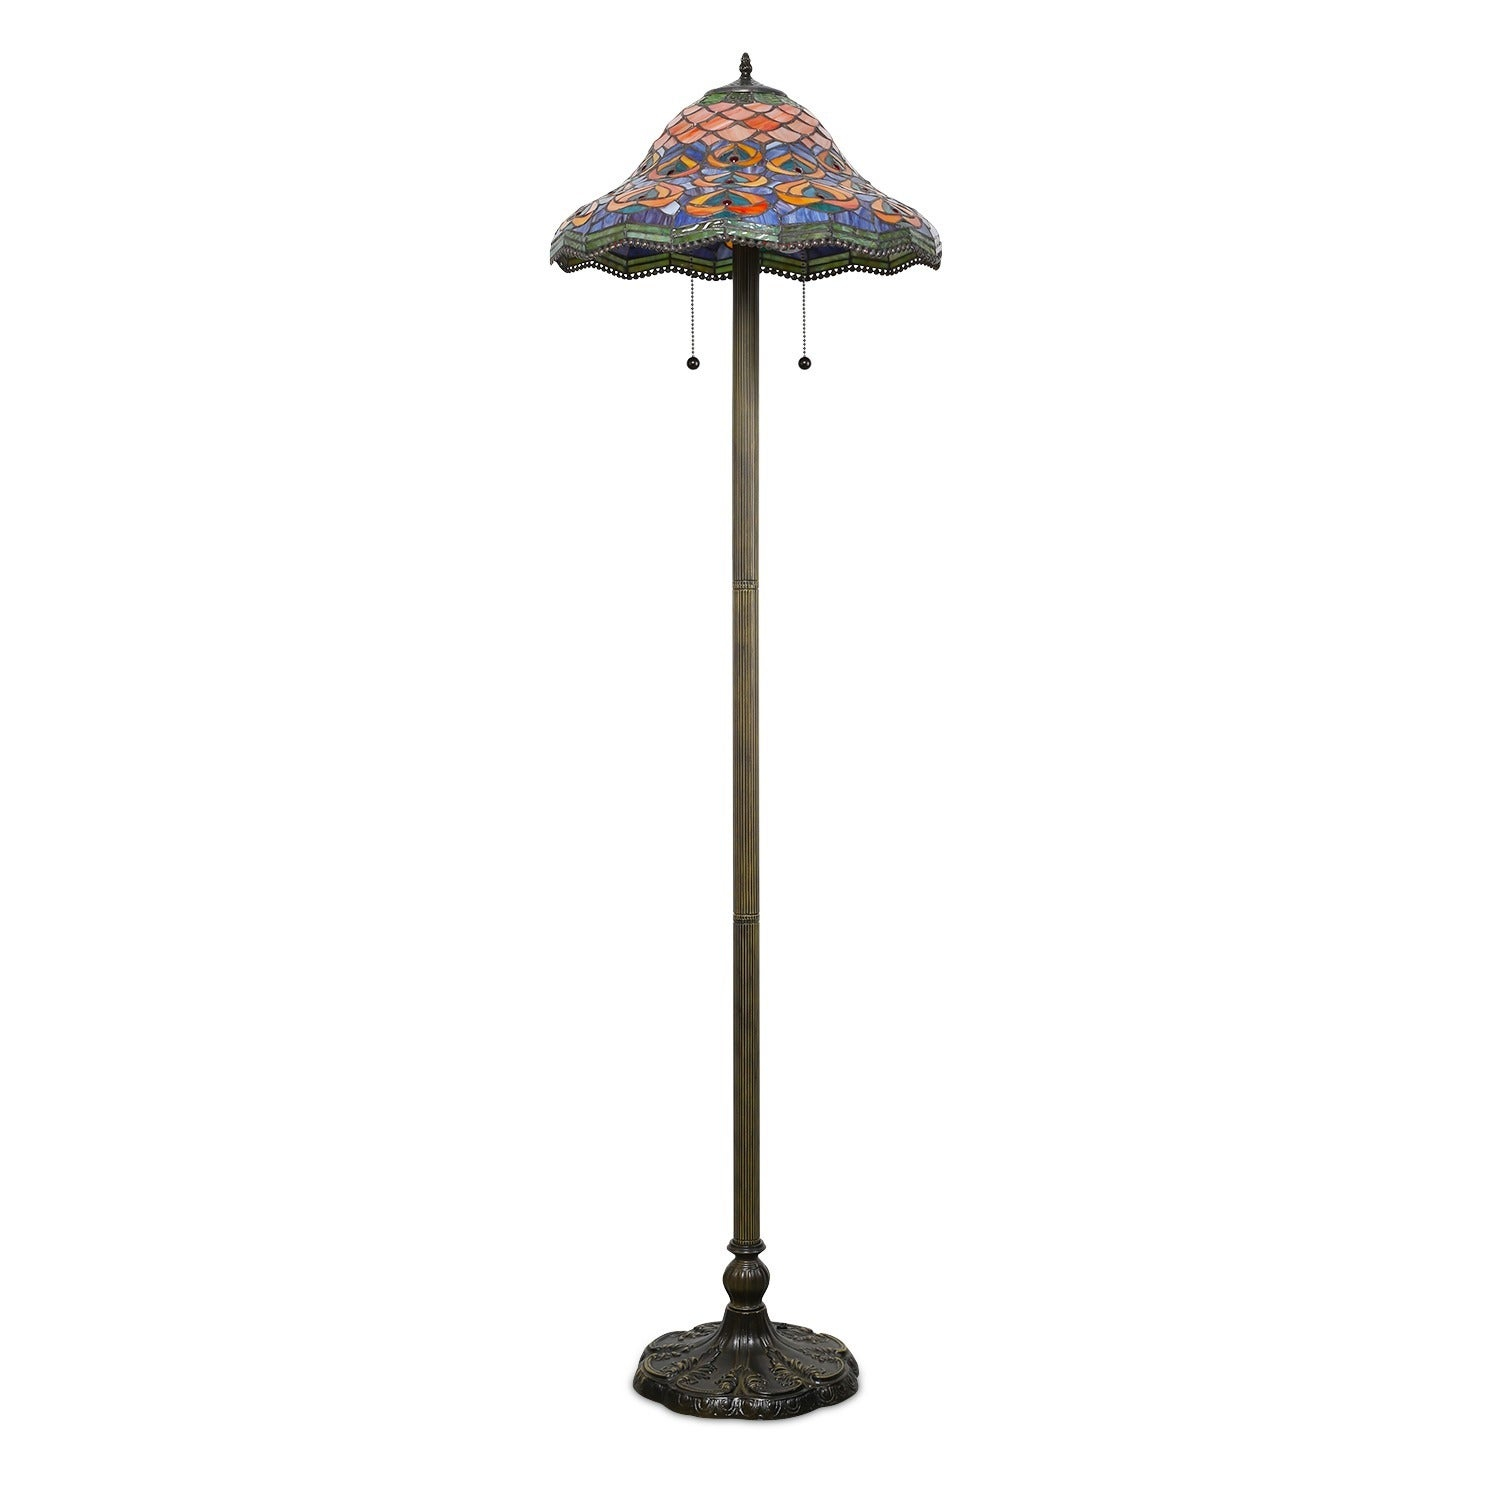 Tiffany Style Peacock Floor Lamp intended for size 1500 X 1500